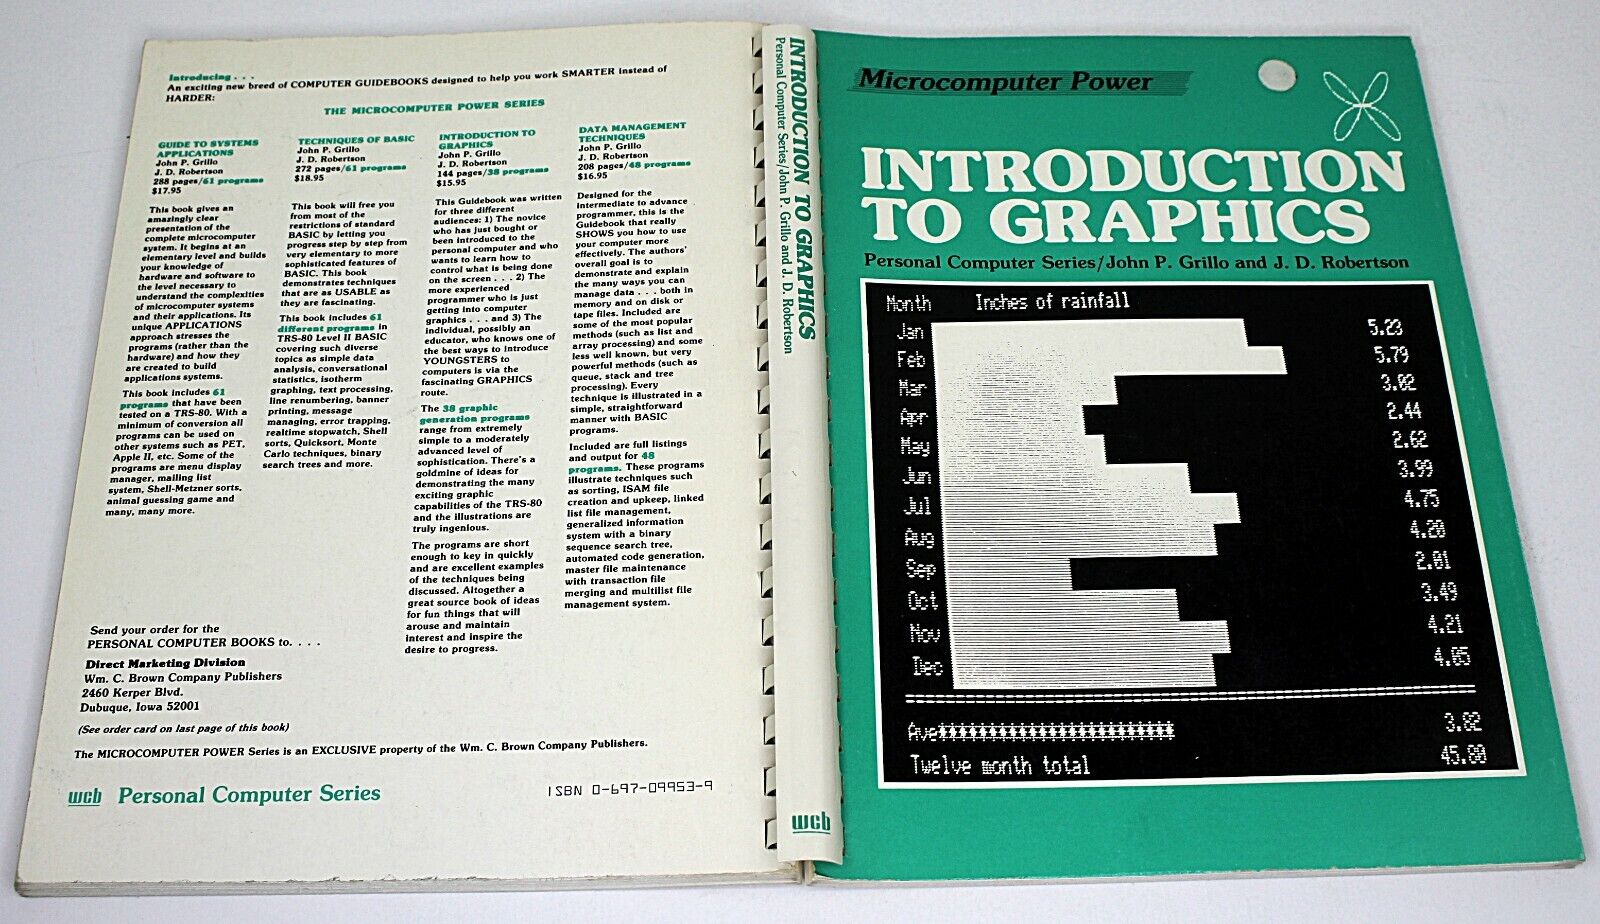 Introduction To Graphics by Grillo & Robertson 1982 Vintage Computing